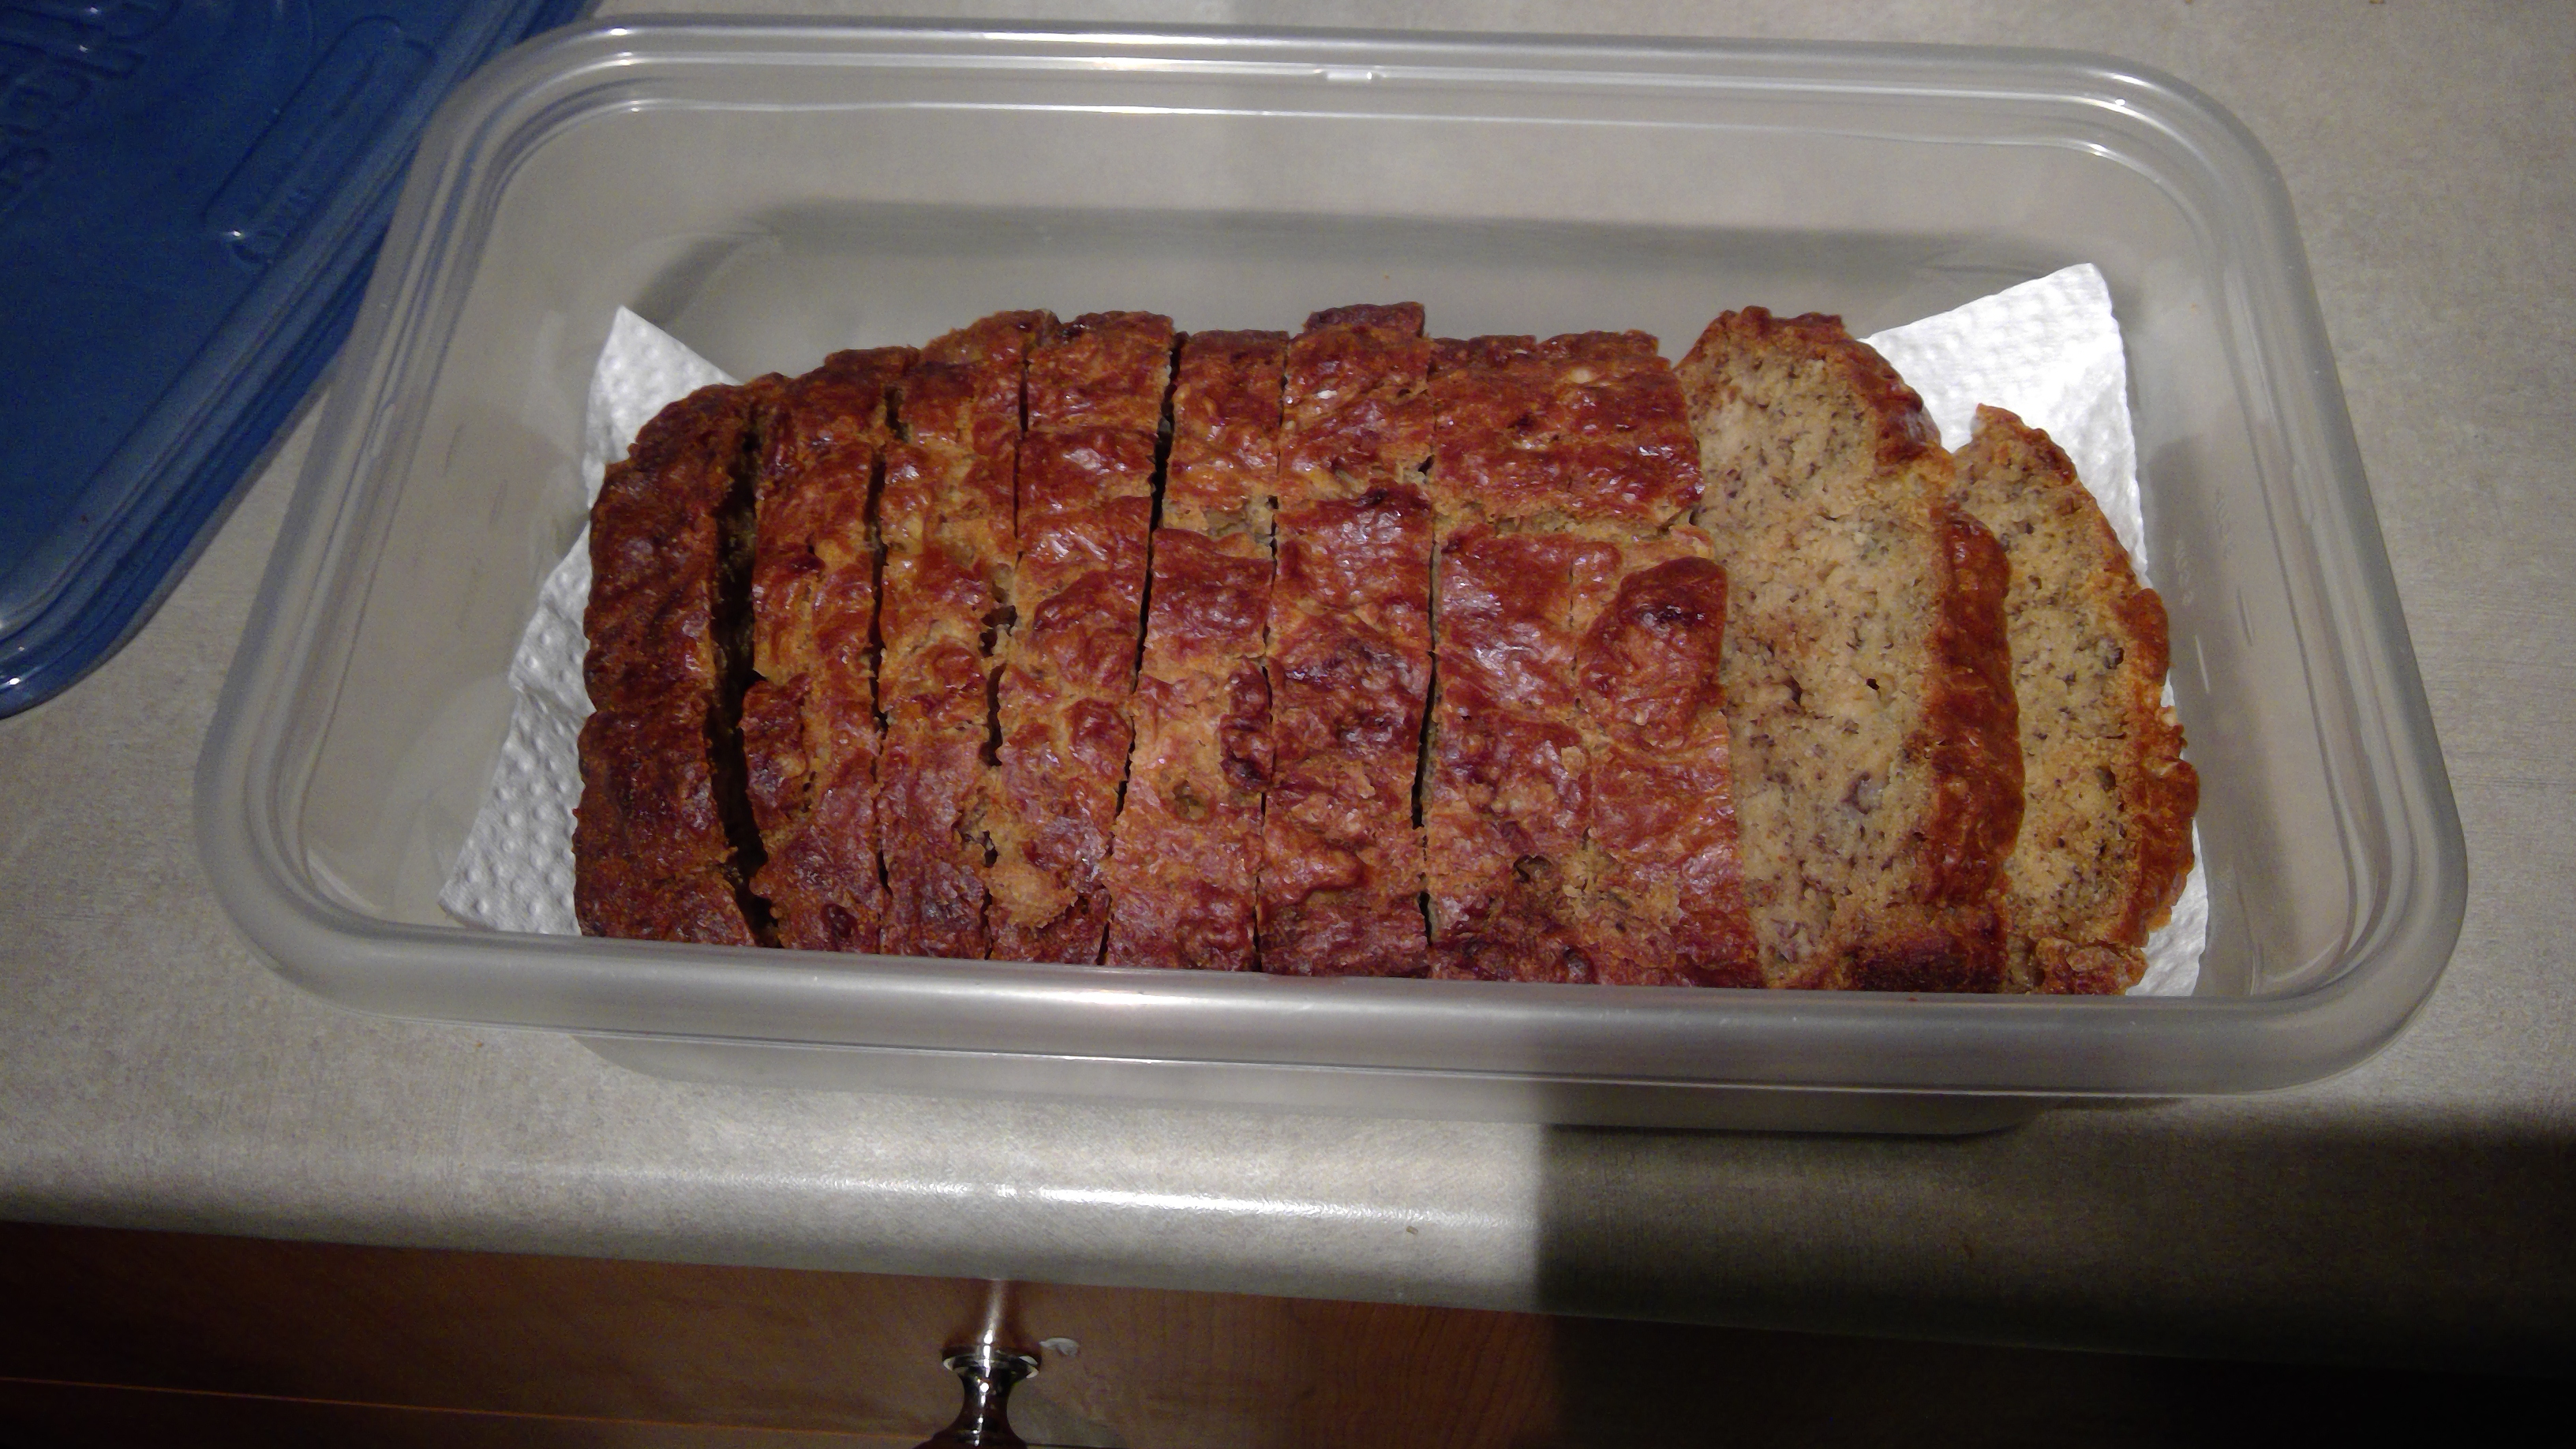 Picture of my first attempt at making banana bread